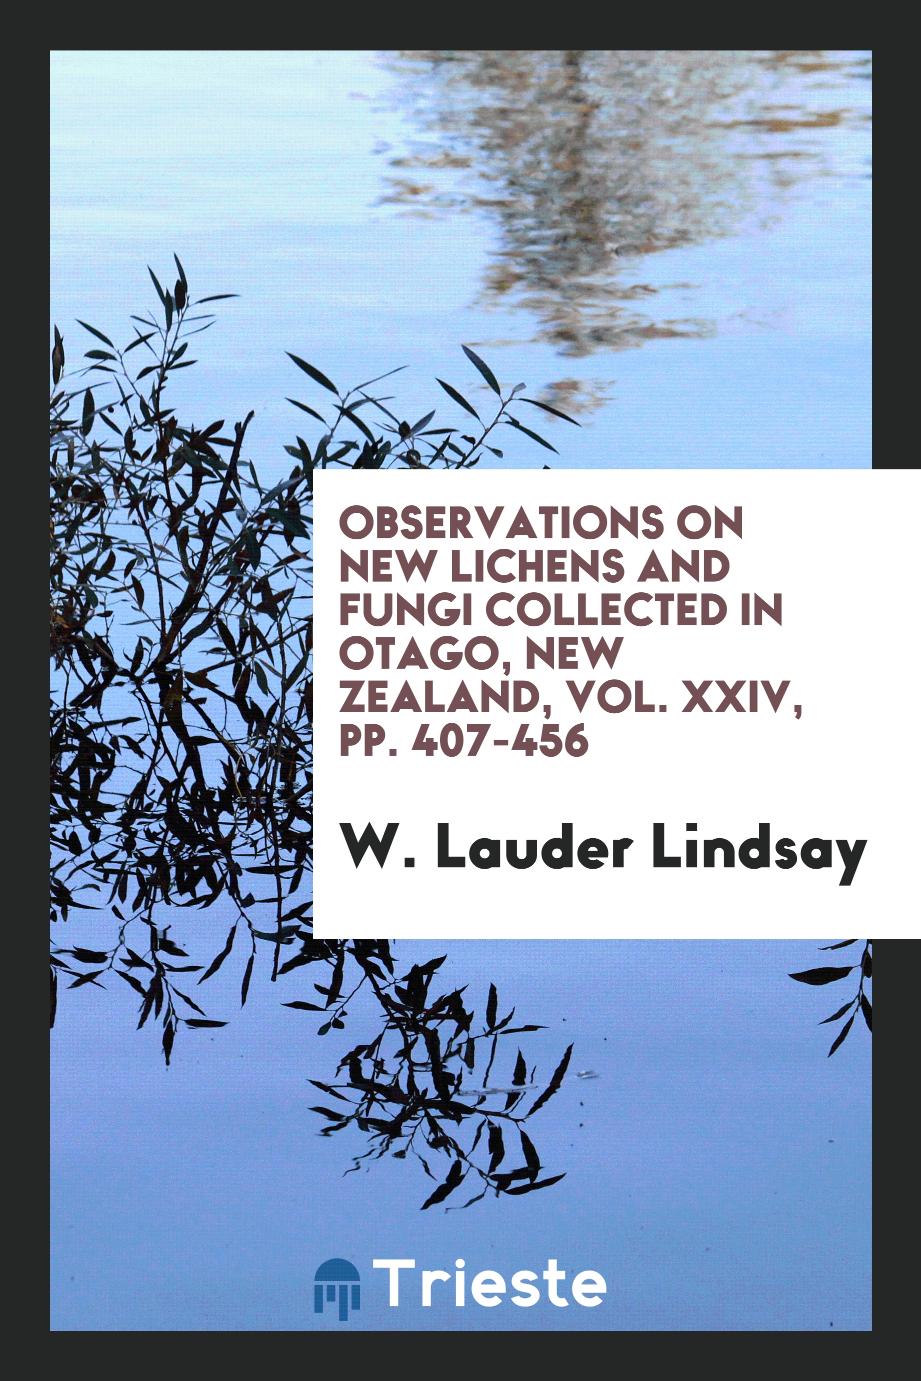 W. Lauder Lindsay - Observations on new lichens and fungi collected in Otago, New Zealand, Vol. XXIV, pp. 407-456